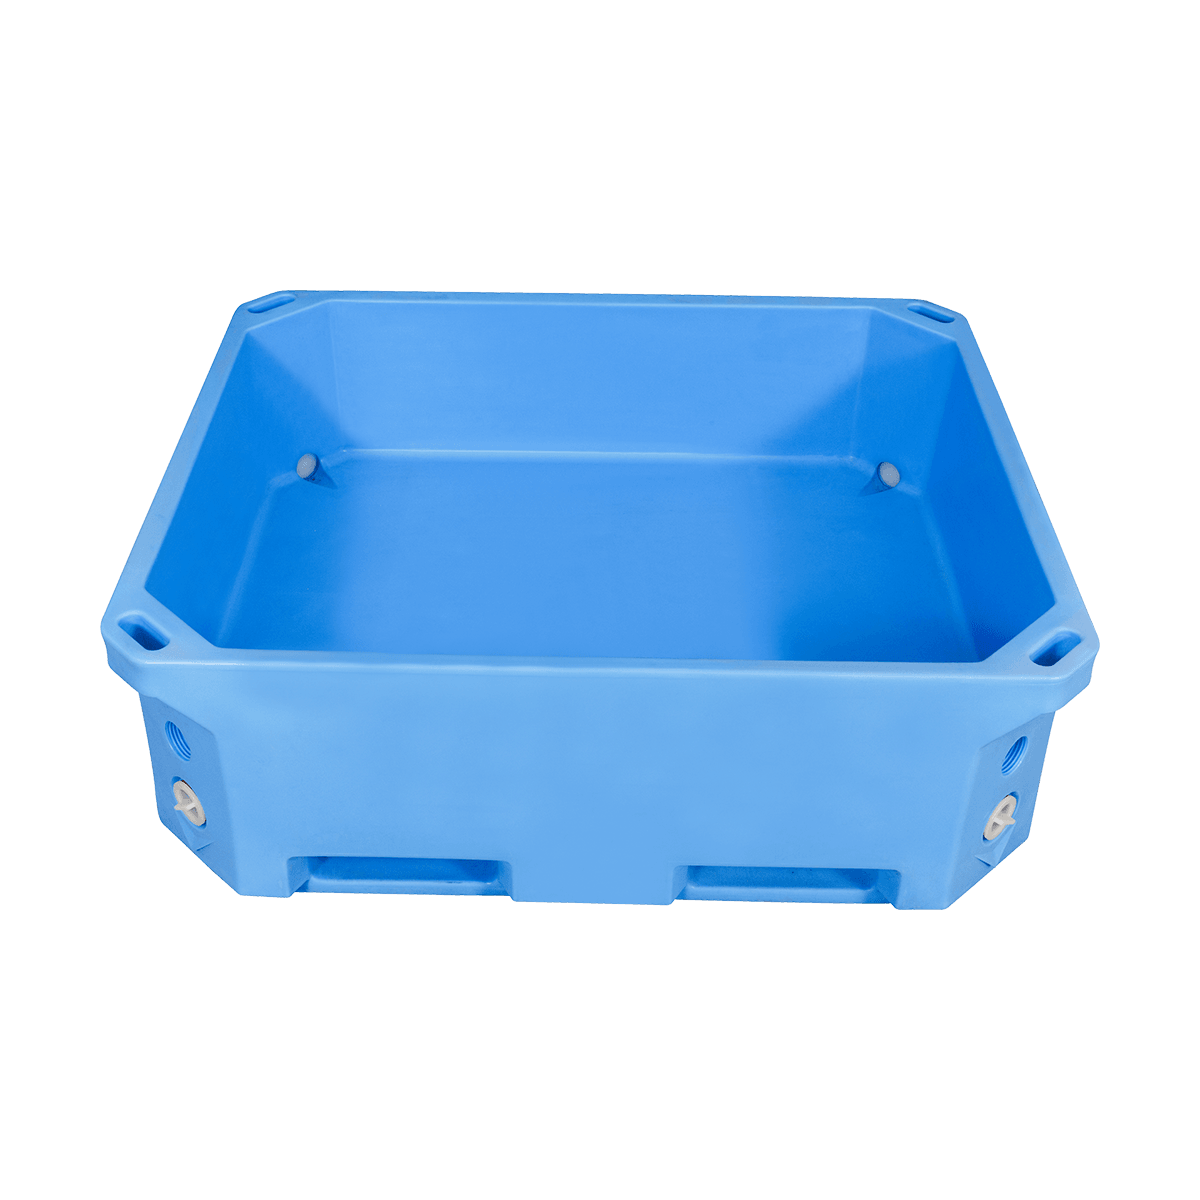 AF-340L Seafood Bins Seafood Industrial Use Plastic Containers